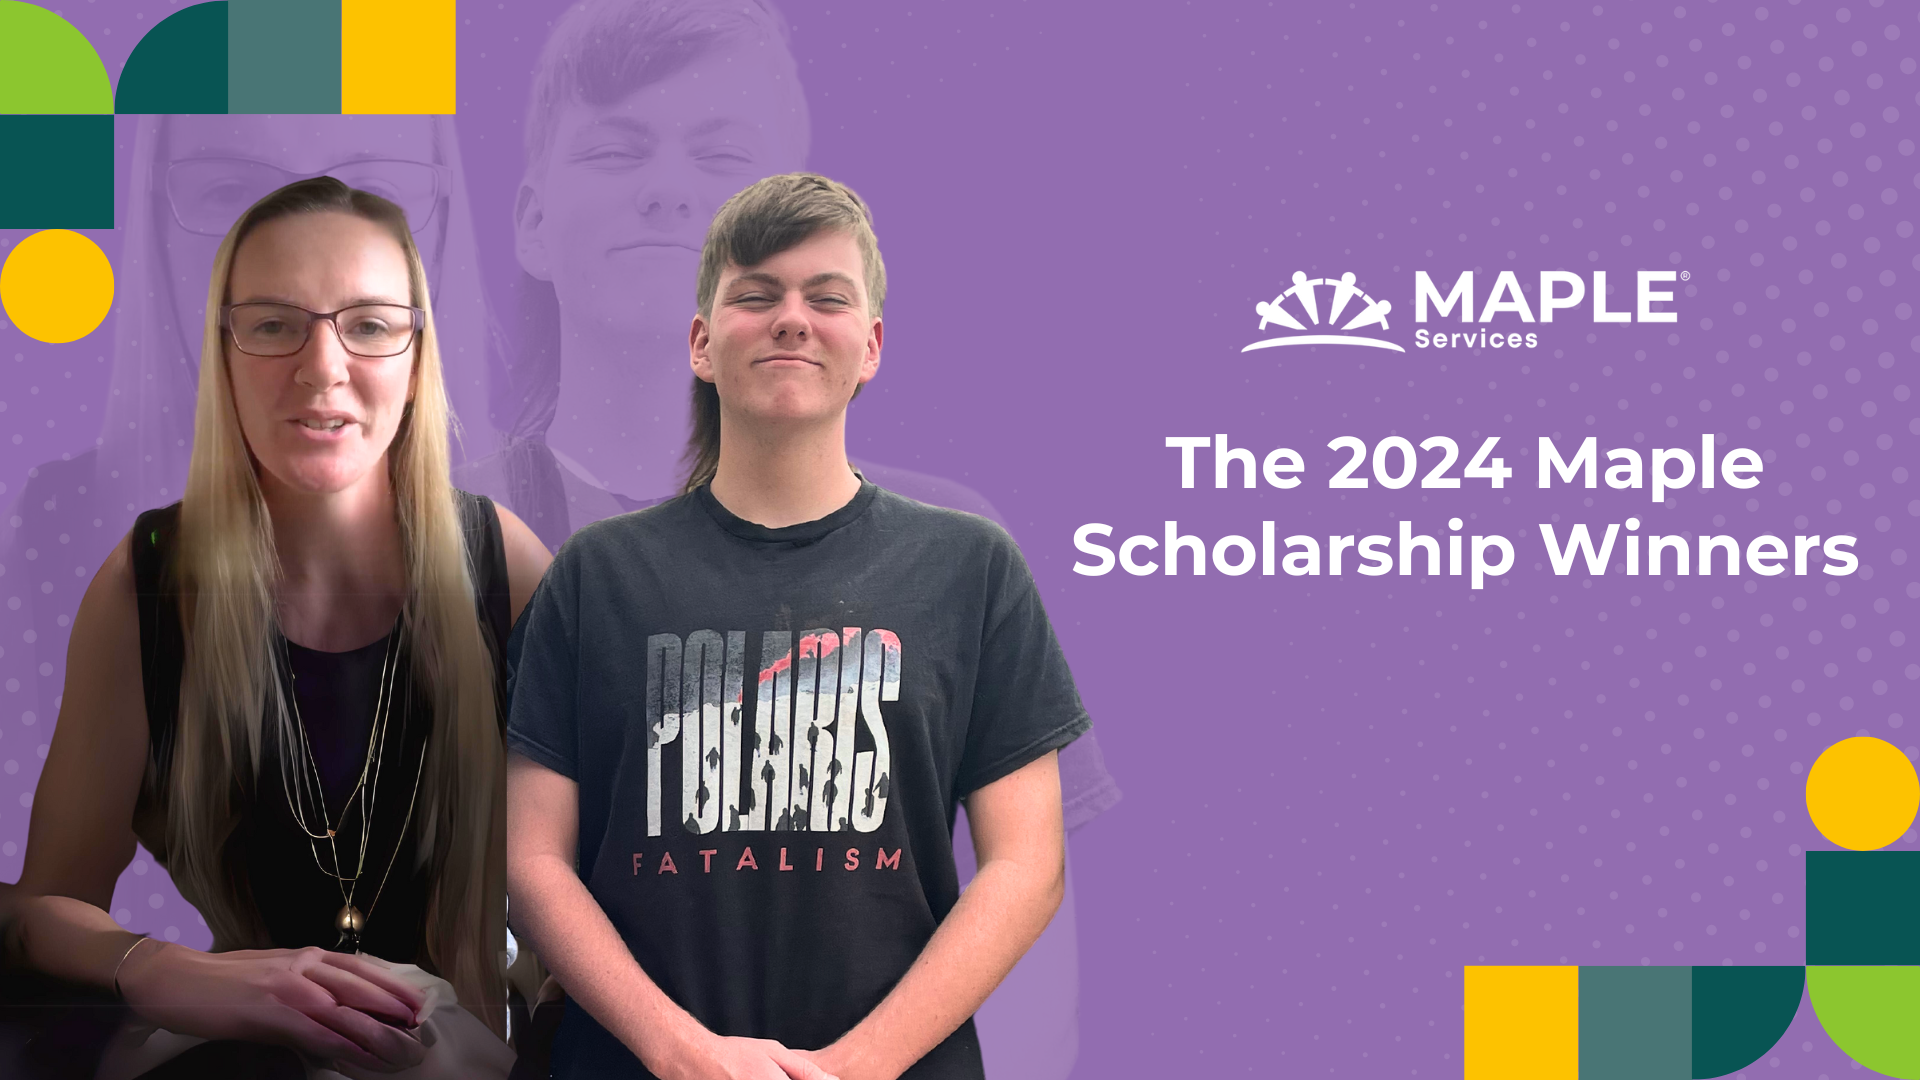 Celebrating Dreams: Announcing the 2024 Maple Scholarship Winners